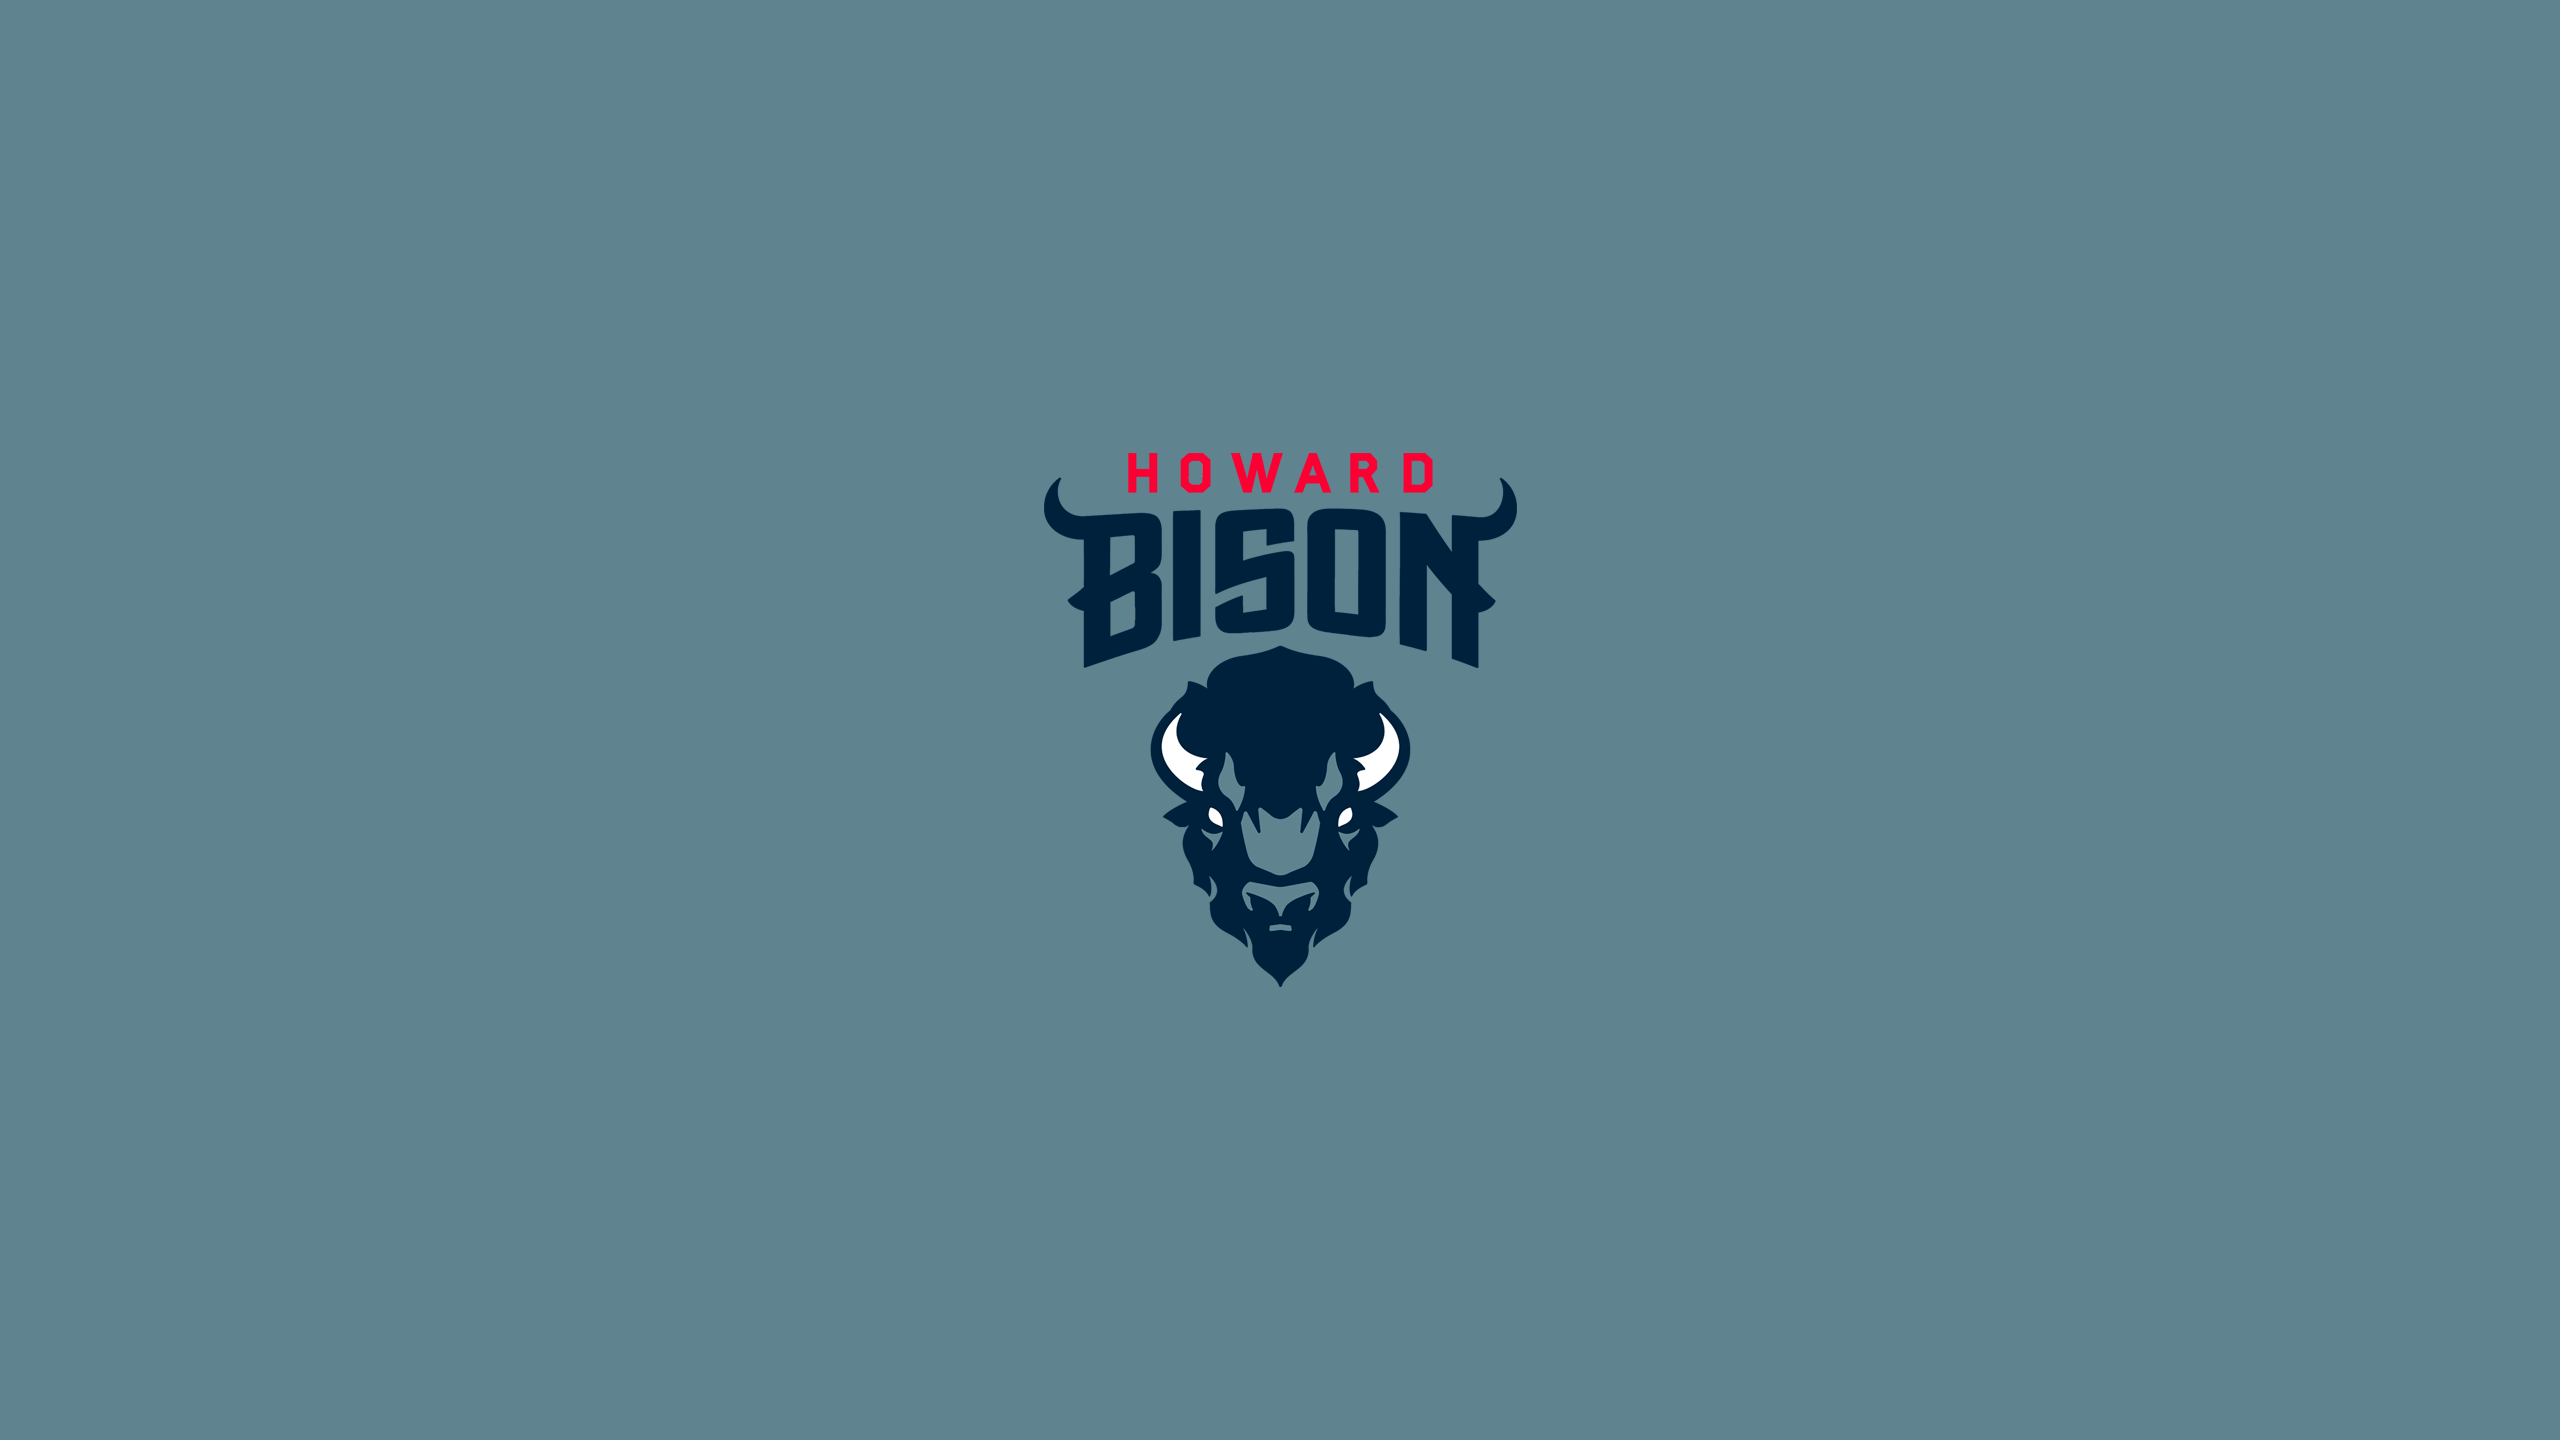 Howard Bison Basketball - NCAAB - Square Bettor